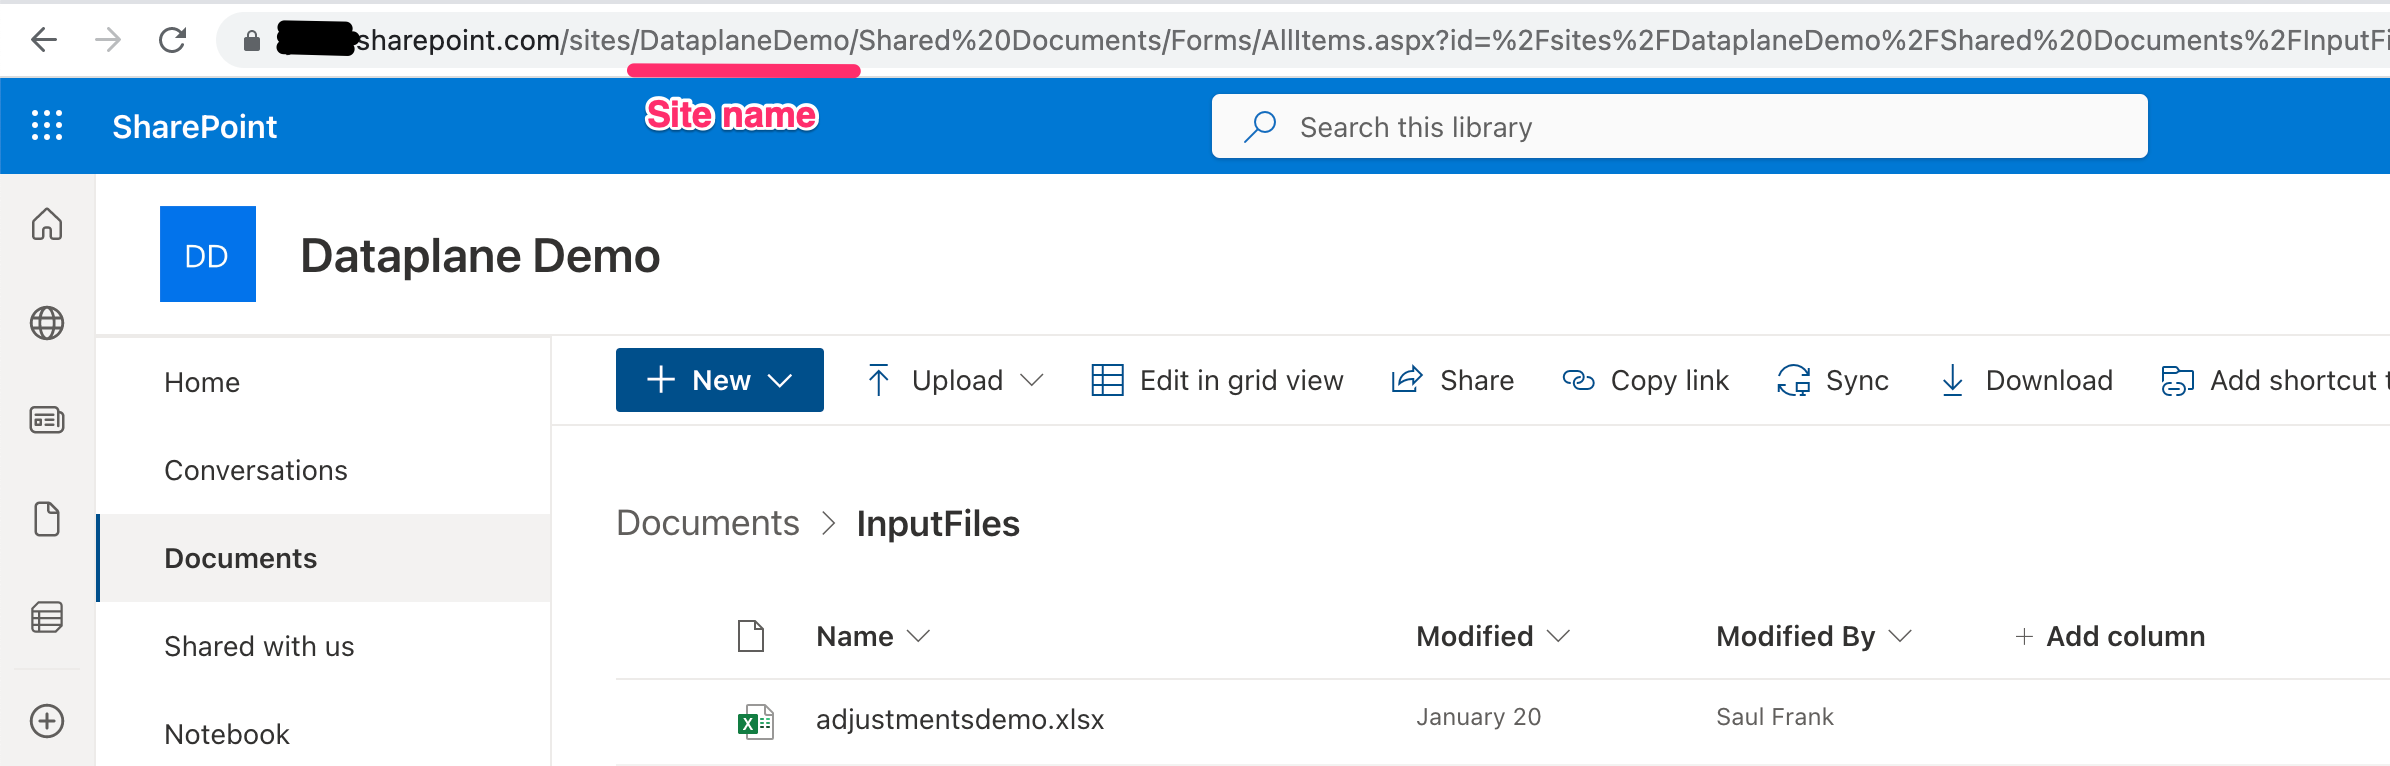 Where to find Sharepoint&#39;s site name